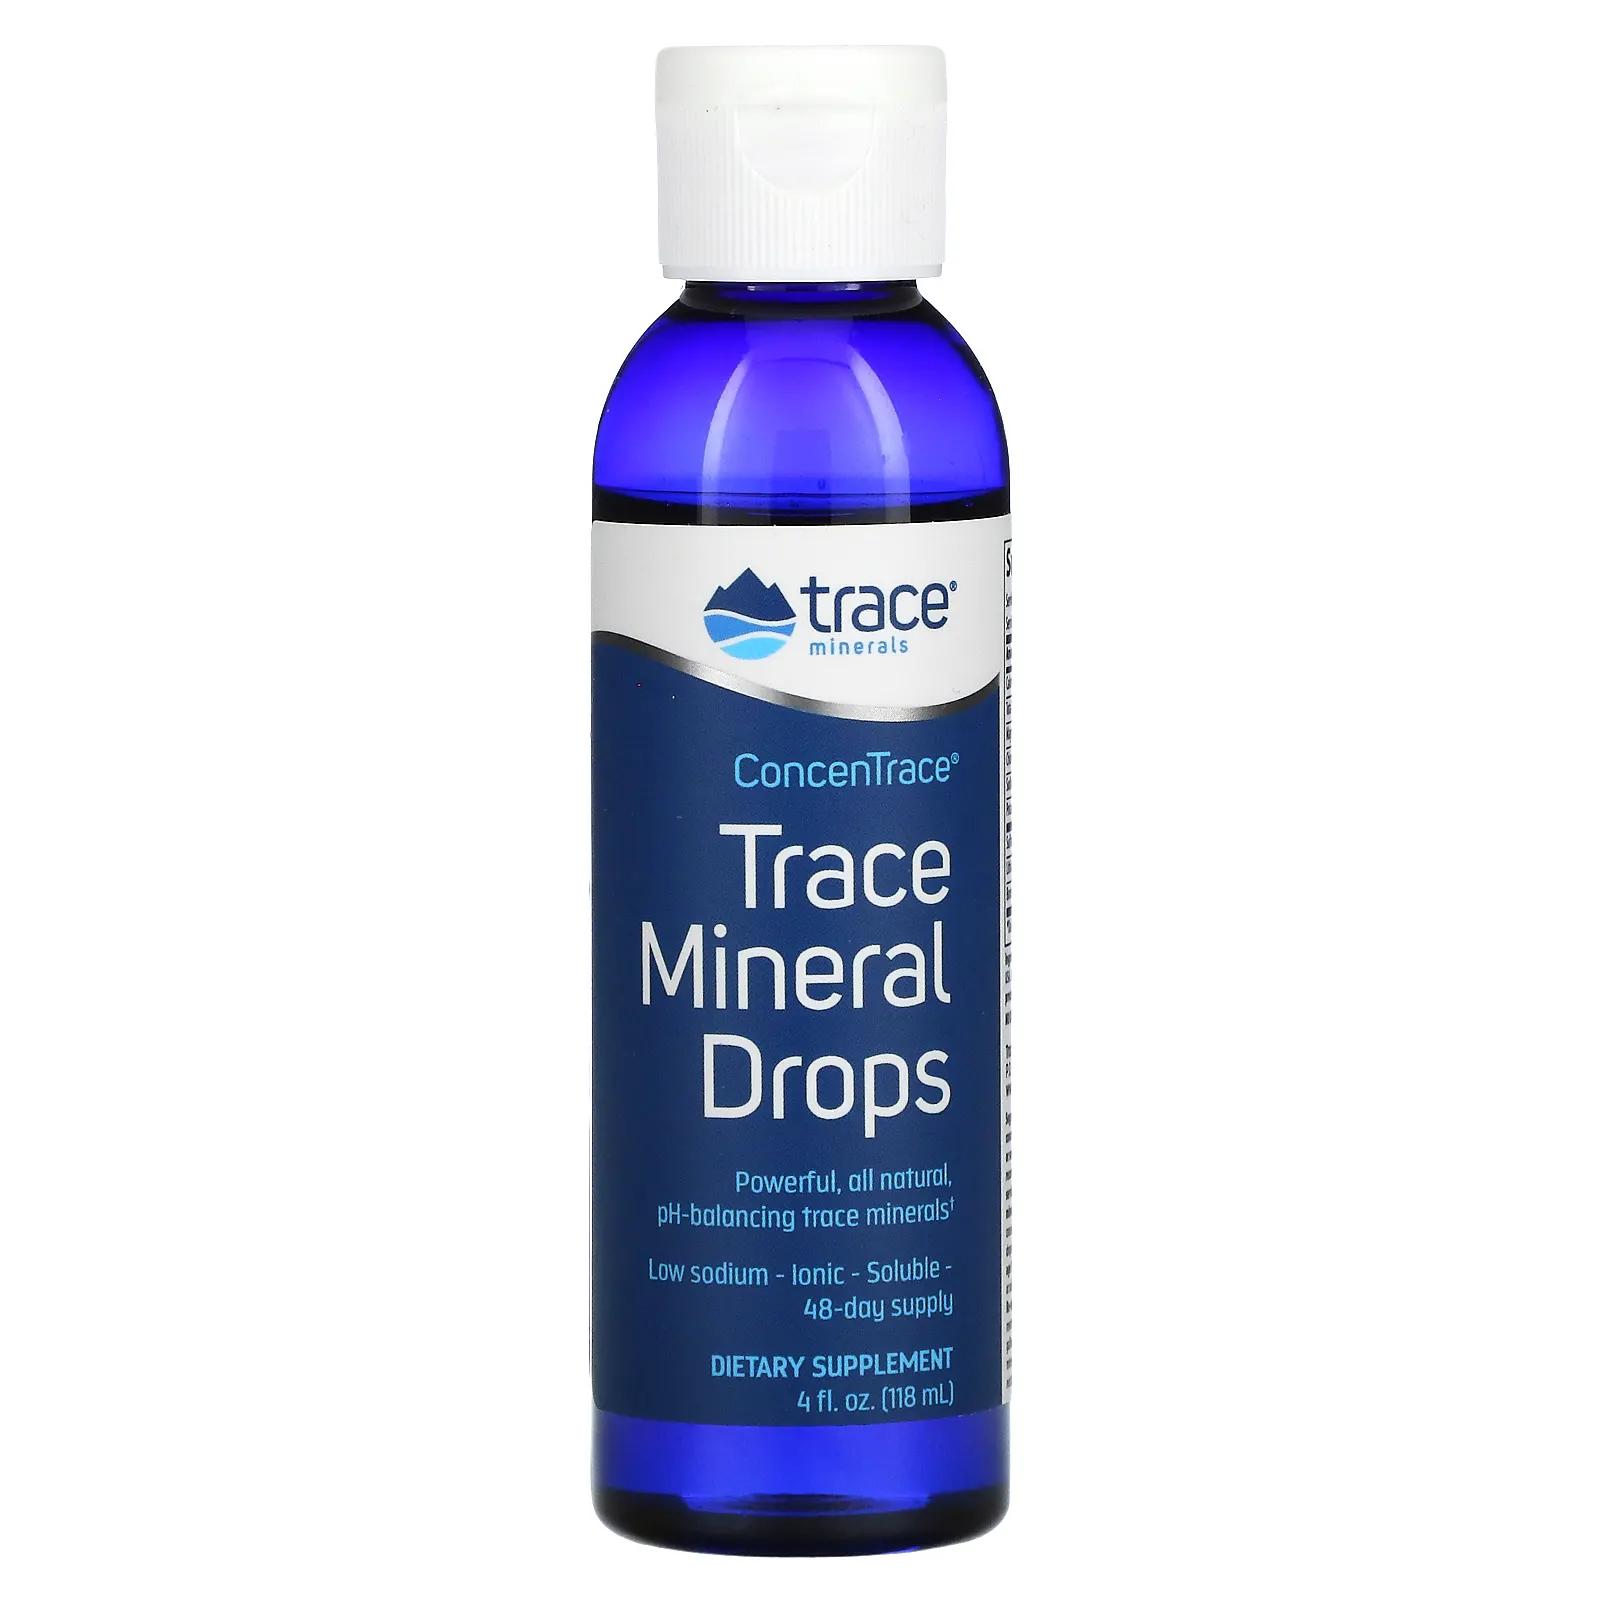 Trace Minerals Research ConcenTrace капли с микроэлементами 118 мл trace minerals ® concentrace микроэлементы в каплях 118 мл 4 жидк унции